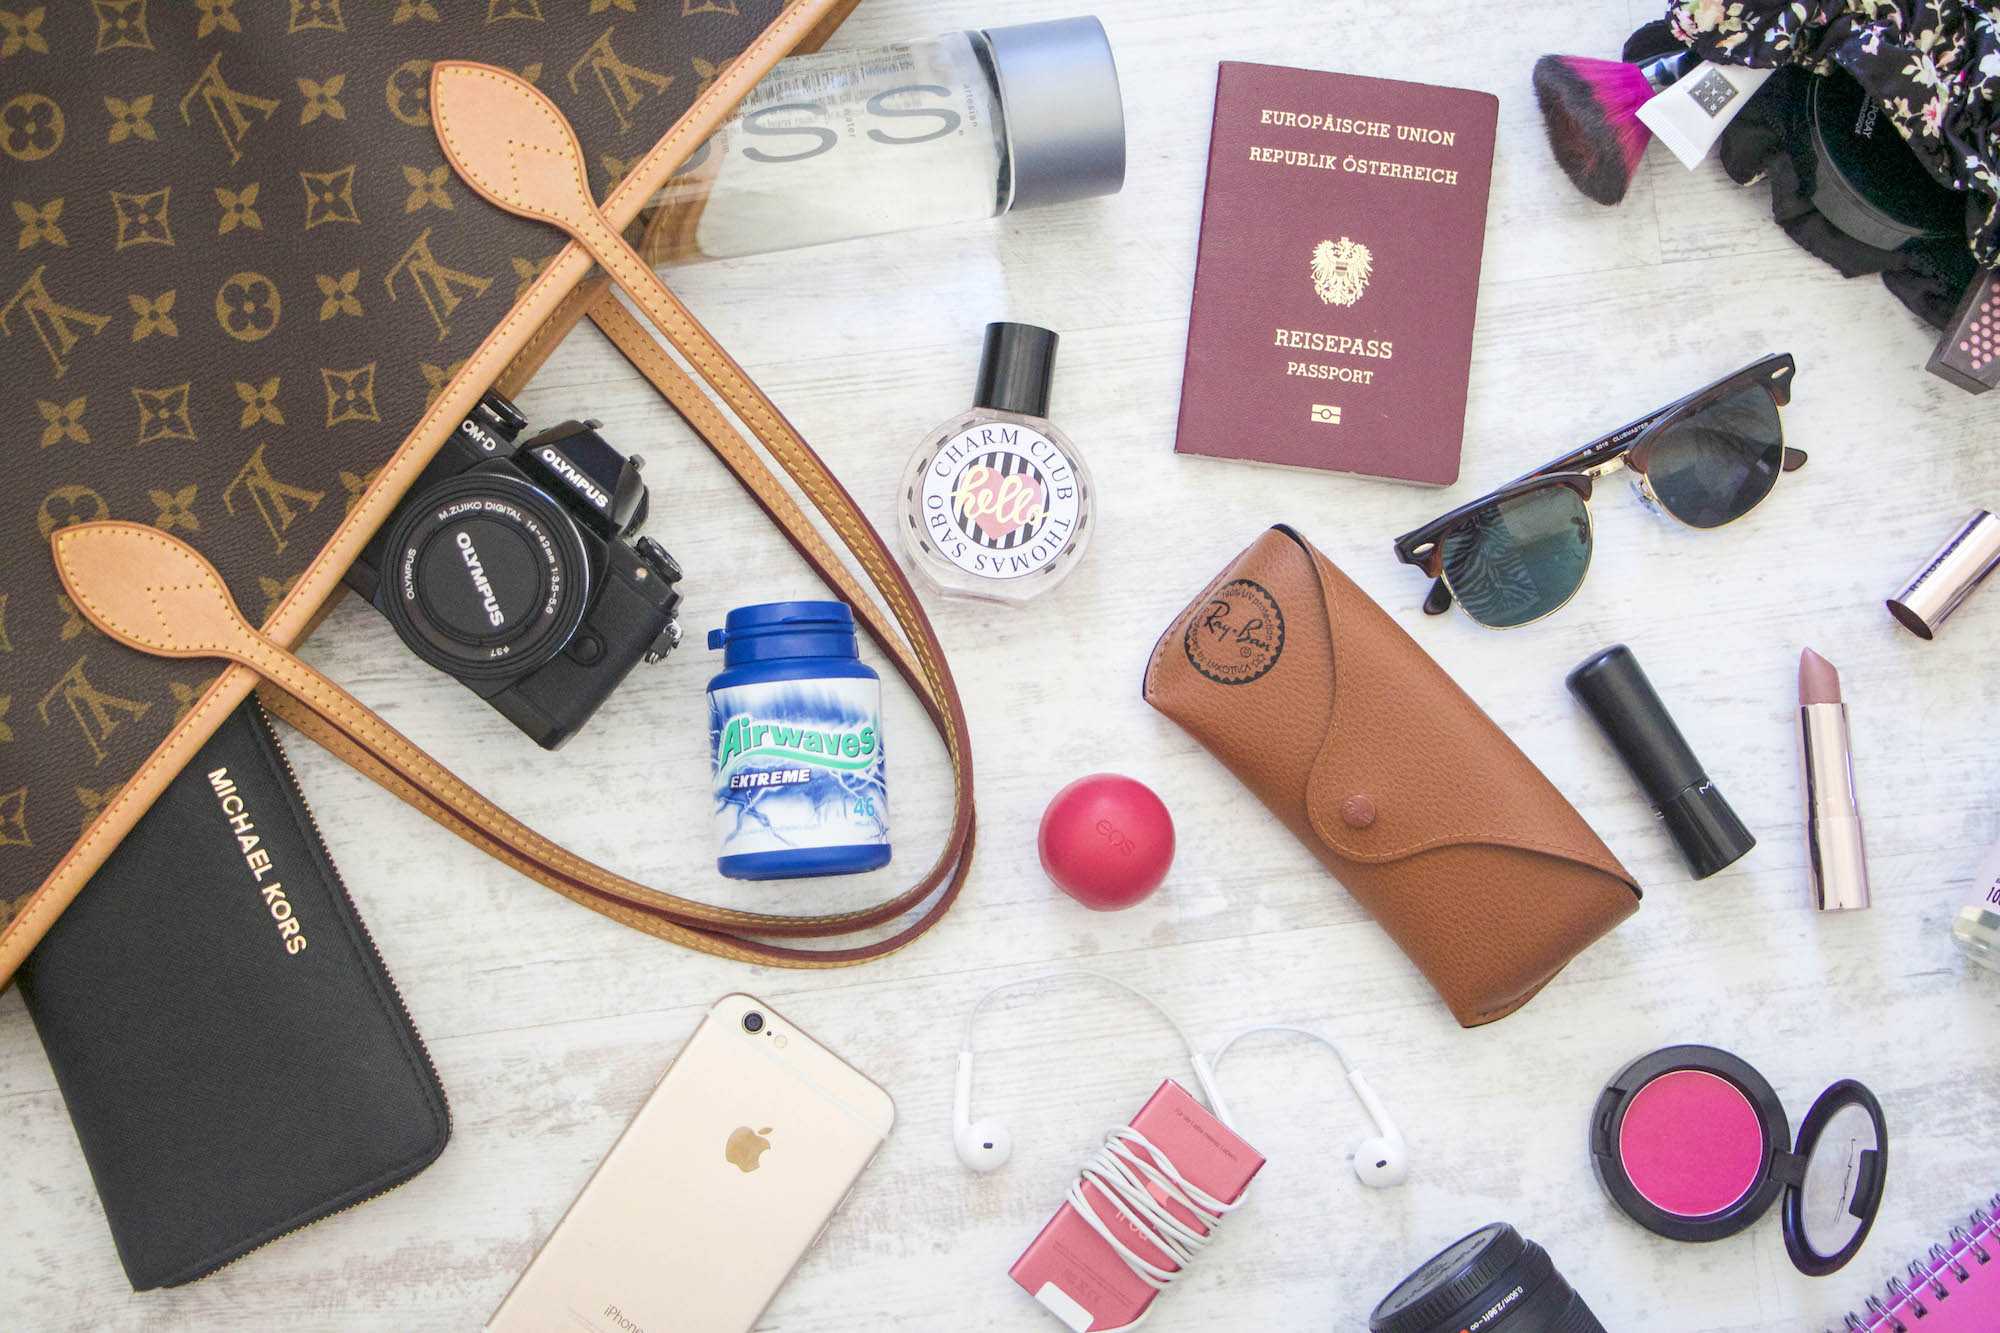 What's in my bag?